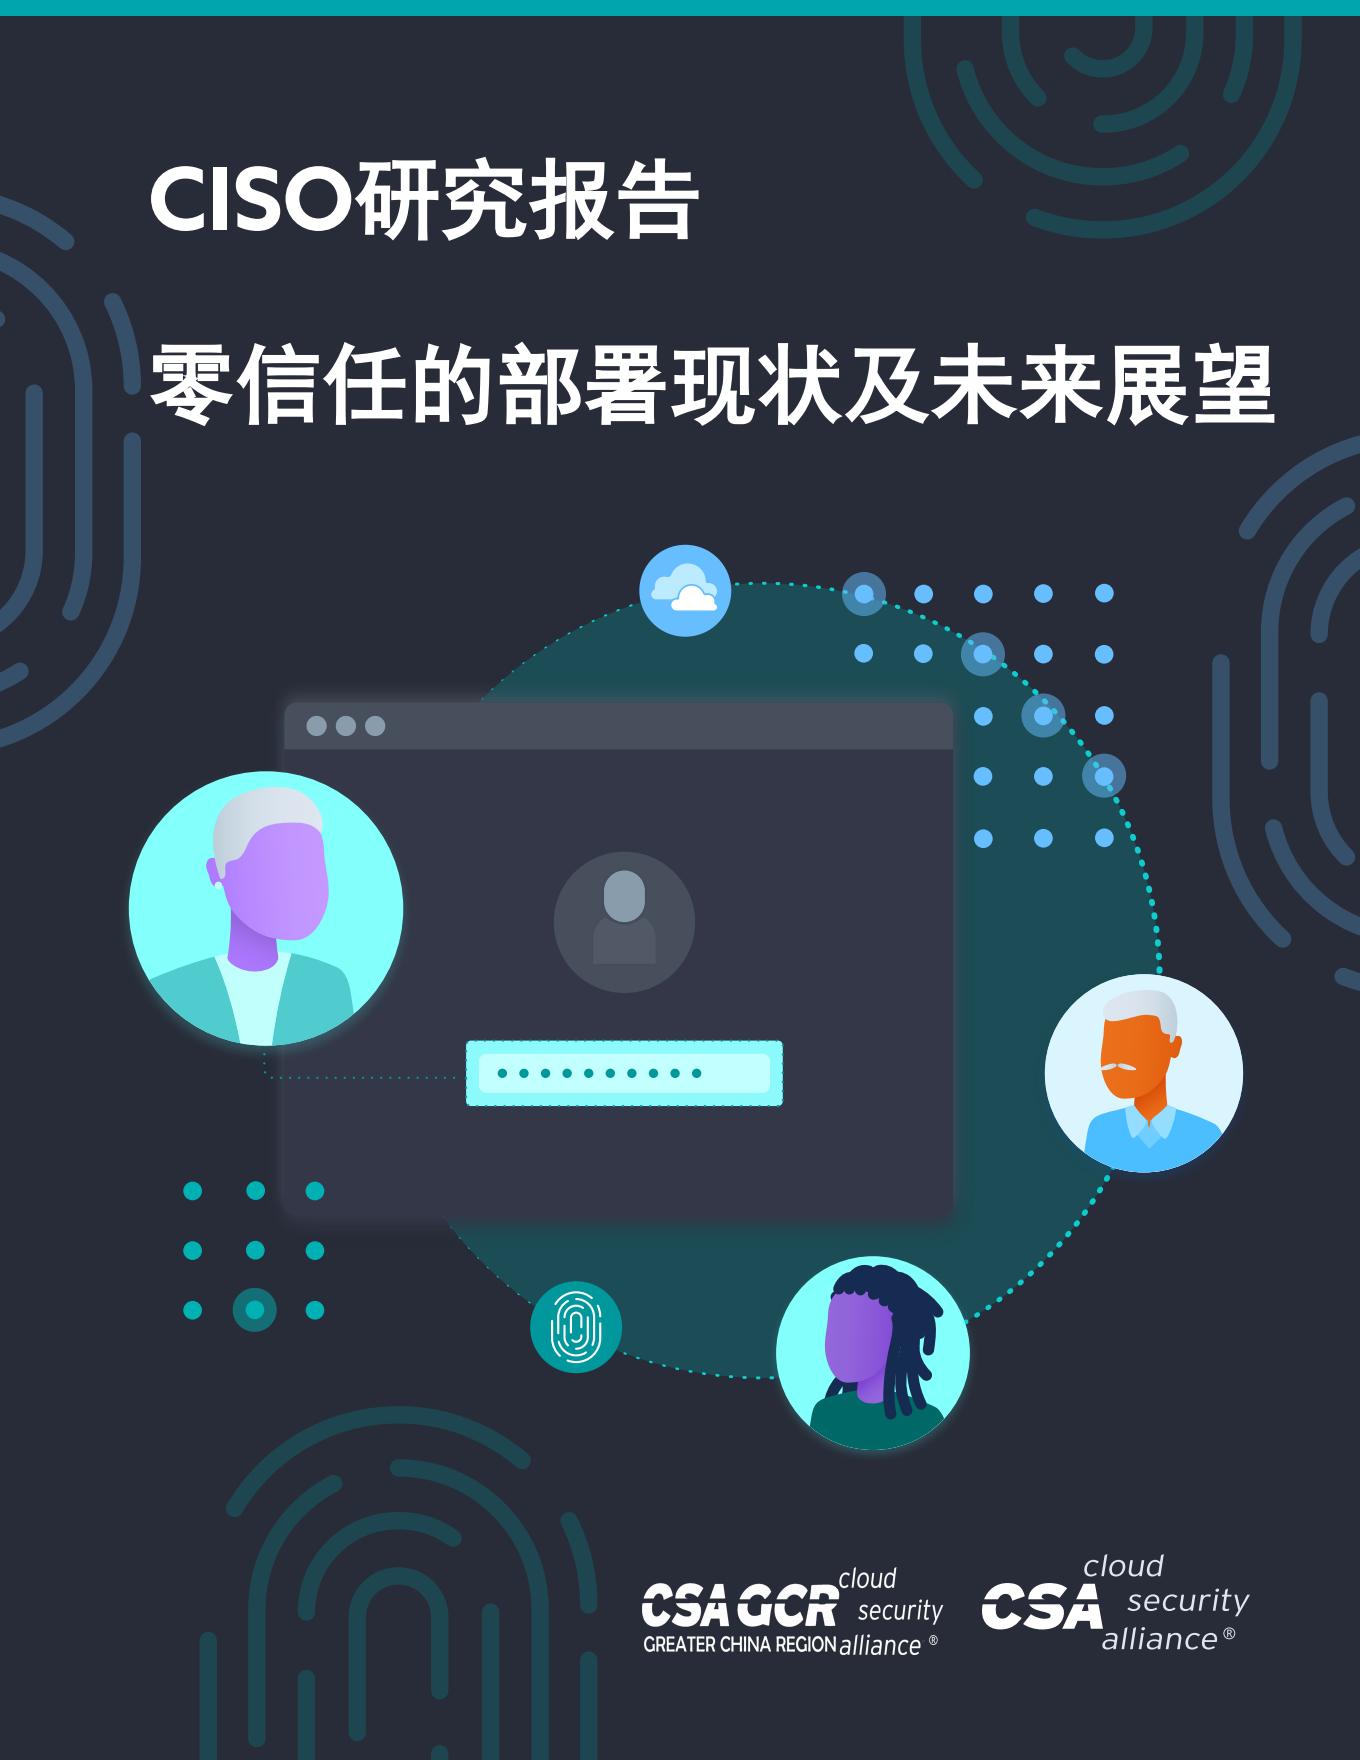 CISO Perspectives and Progress in Deploying Zero Trust - Chinese Translation